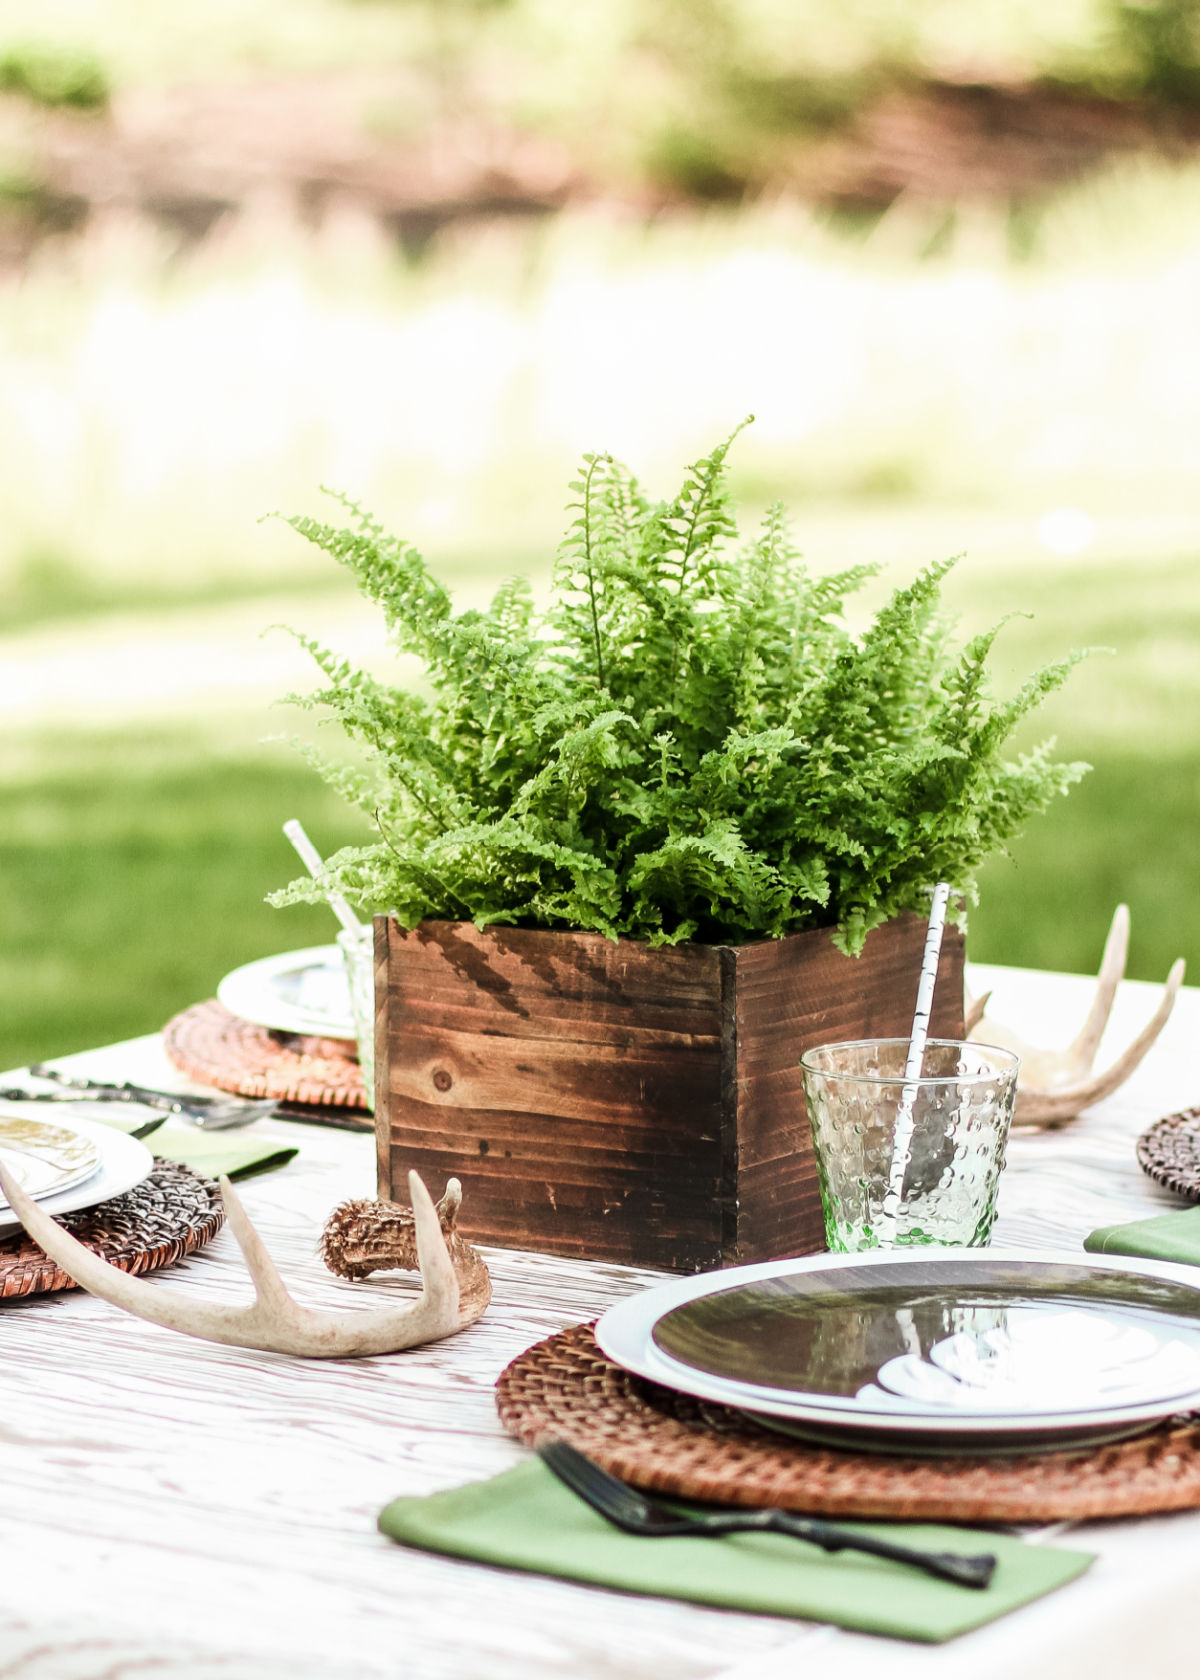 outdoor table setting with fern plant centerpiece.